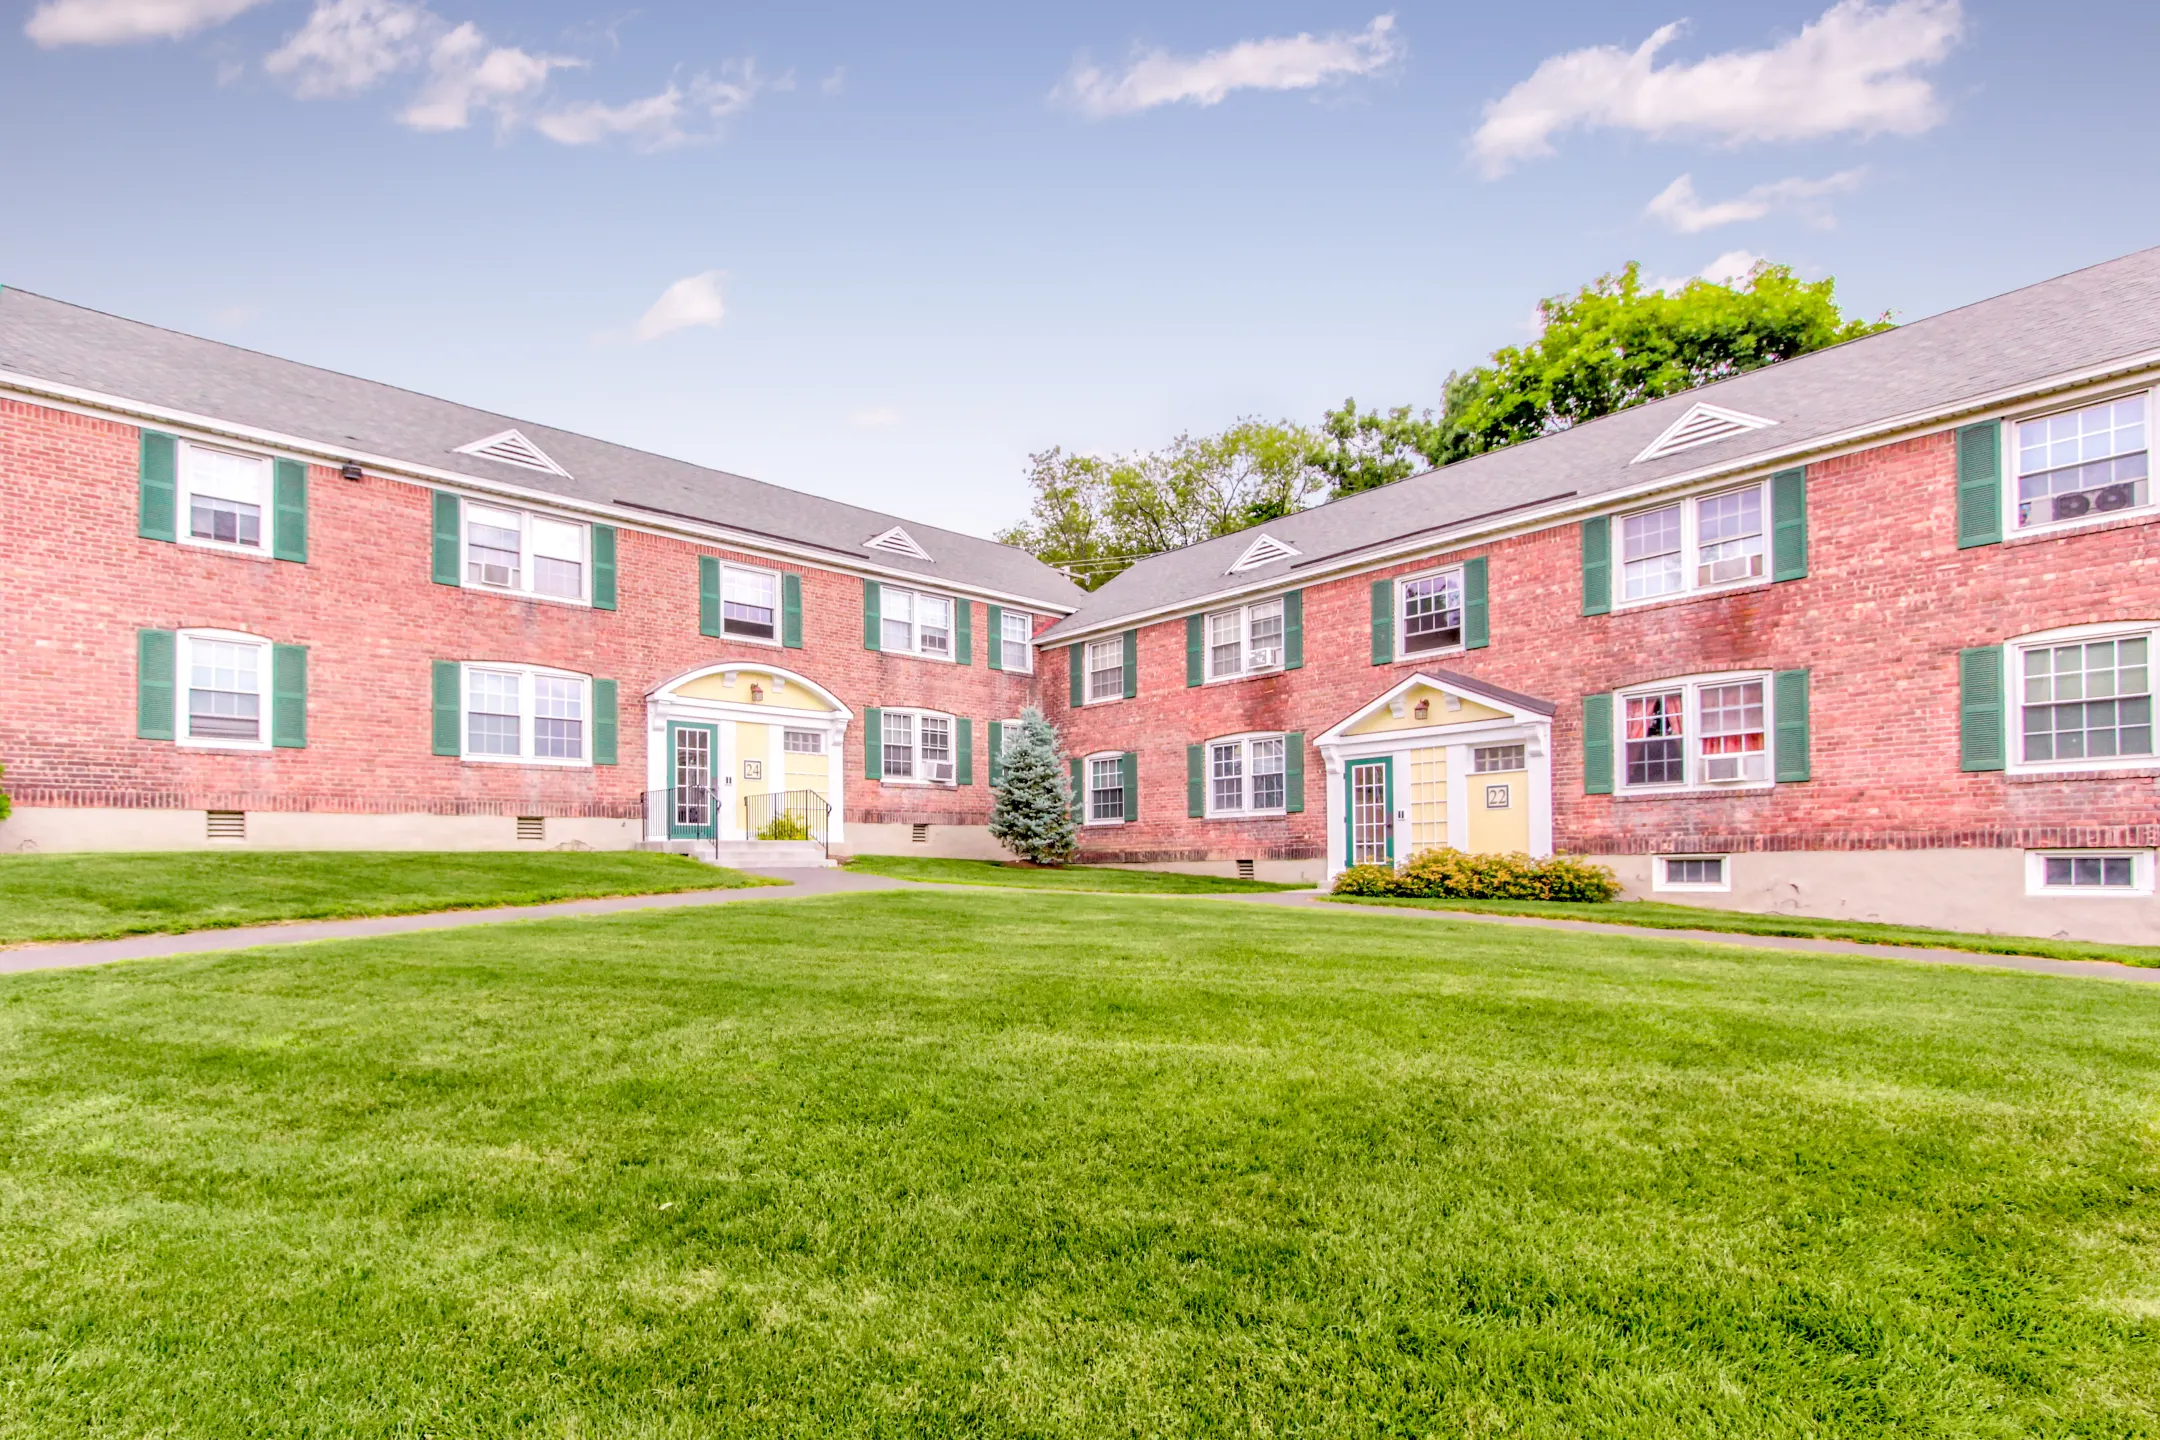 Building - Schuyler Place Apartments - Menands, NY